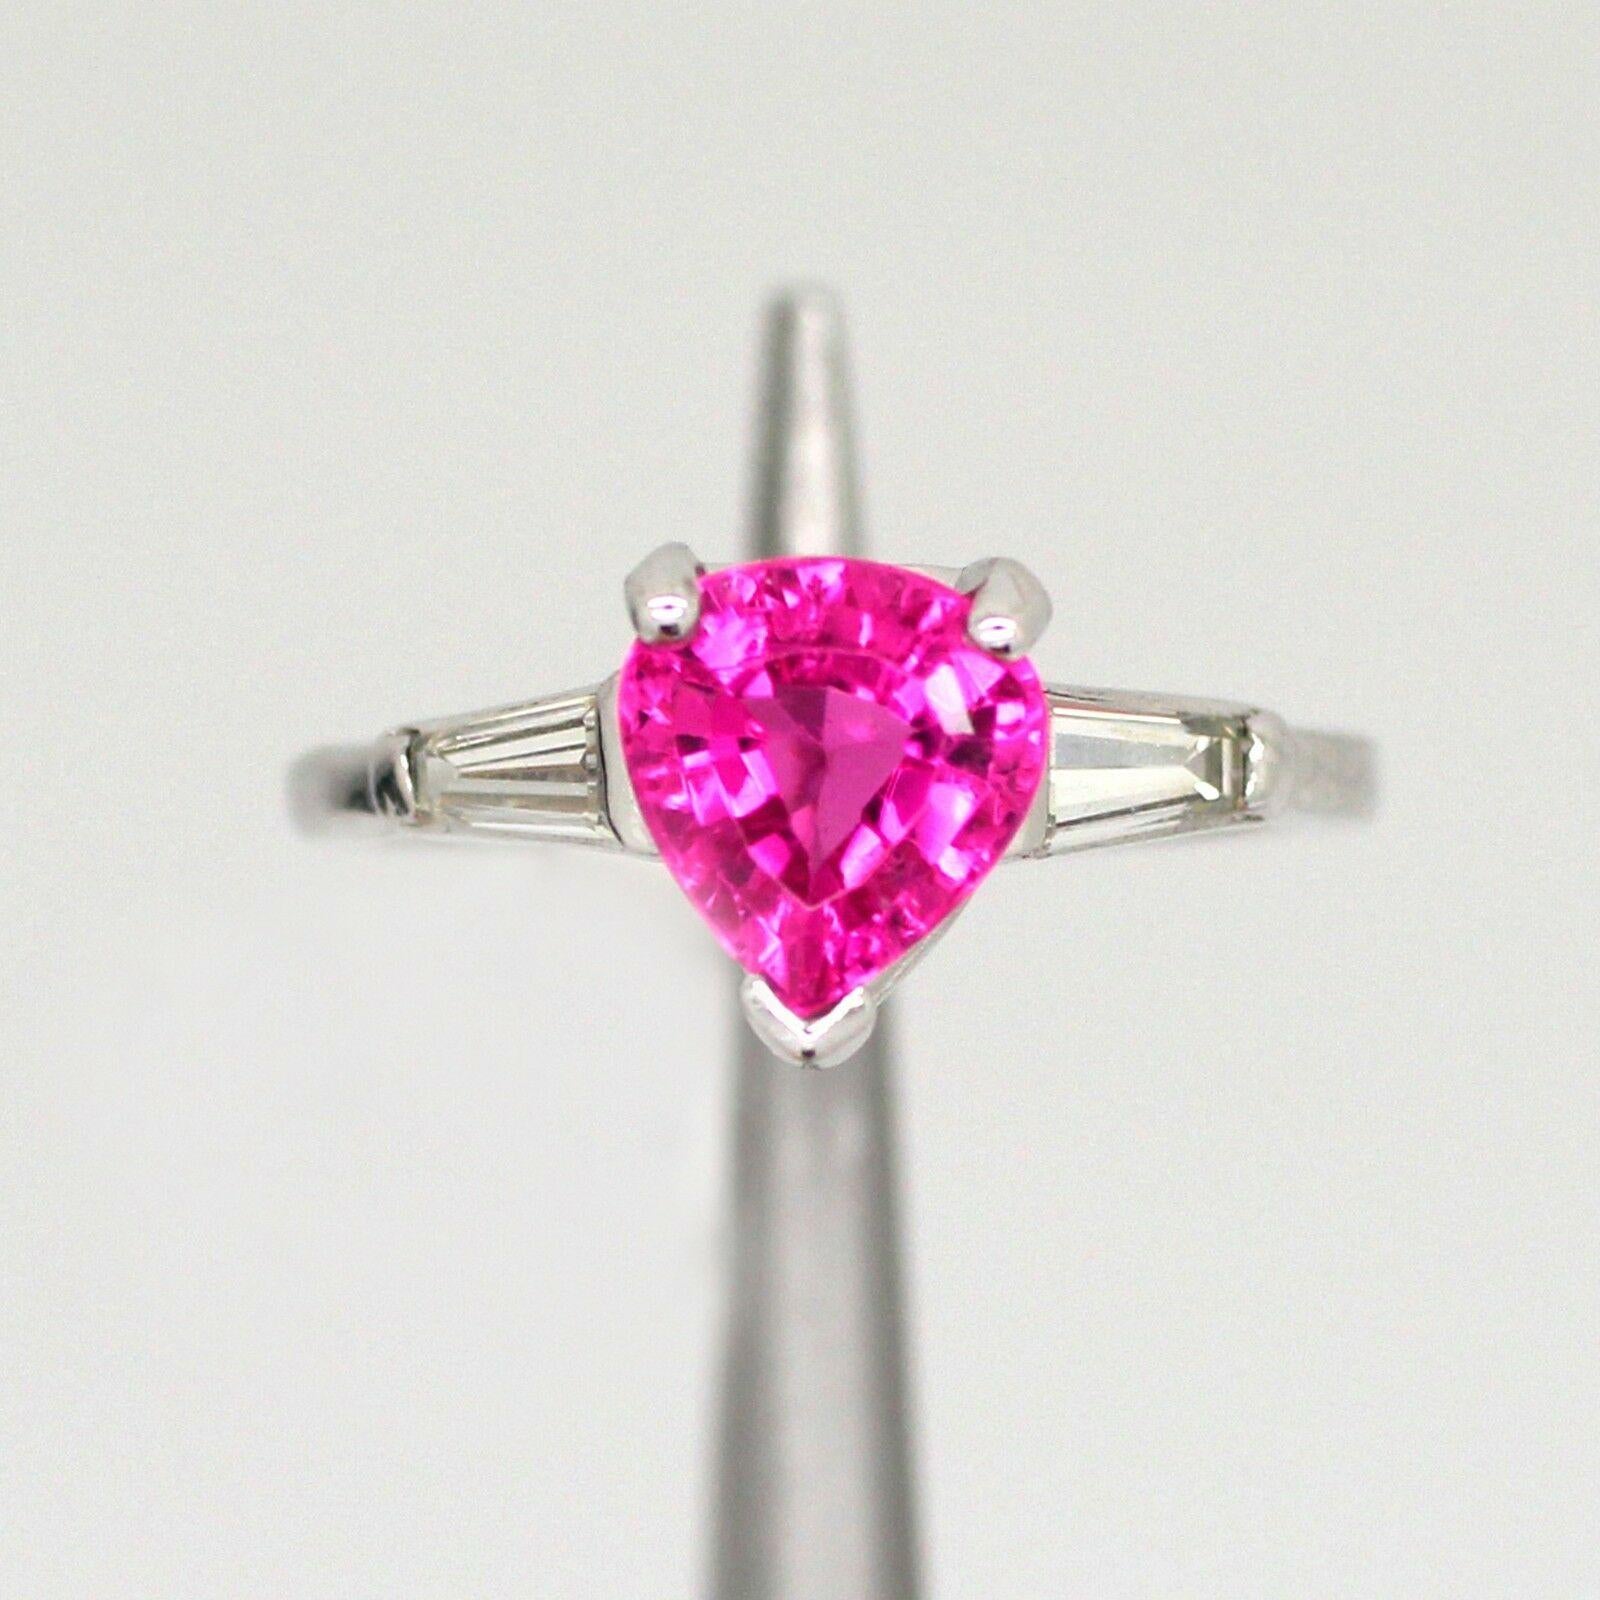           This platinum ring features an AGL certified 1.33 carat natural tourmaline, pink color, and pear mixed cut center gemstone. It contains a tapered baguette diamond on each side, G in color and VS2 in clarity, approximately weighing at 0.30